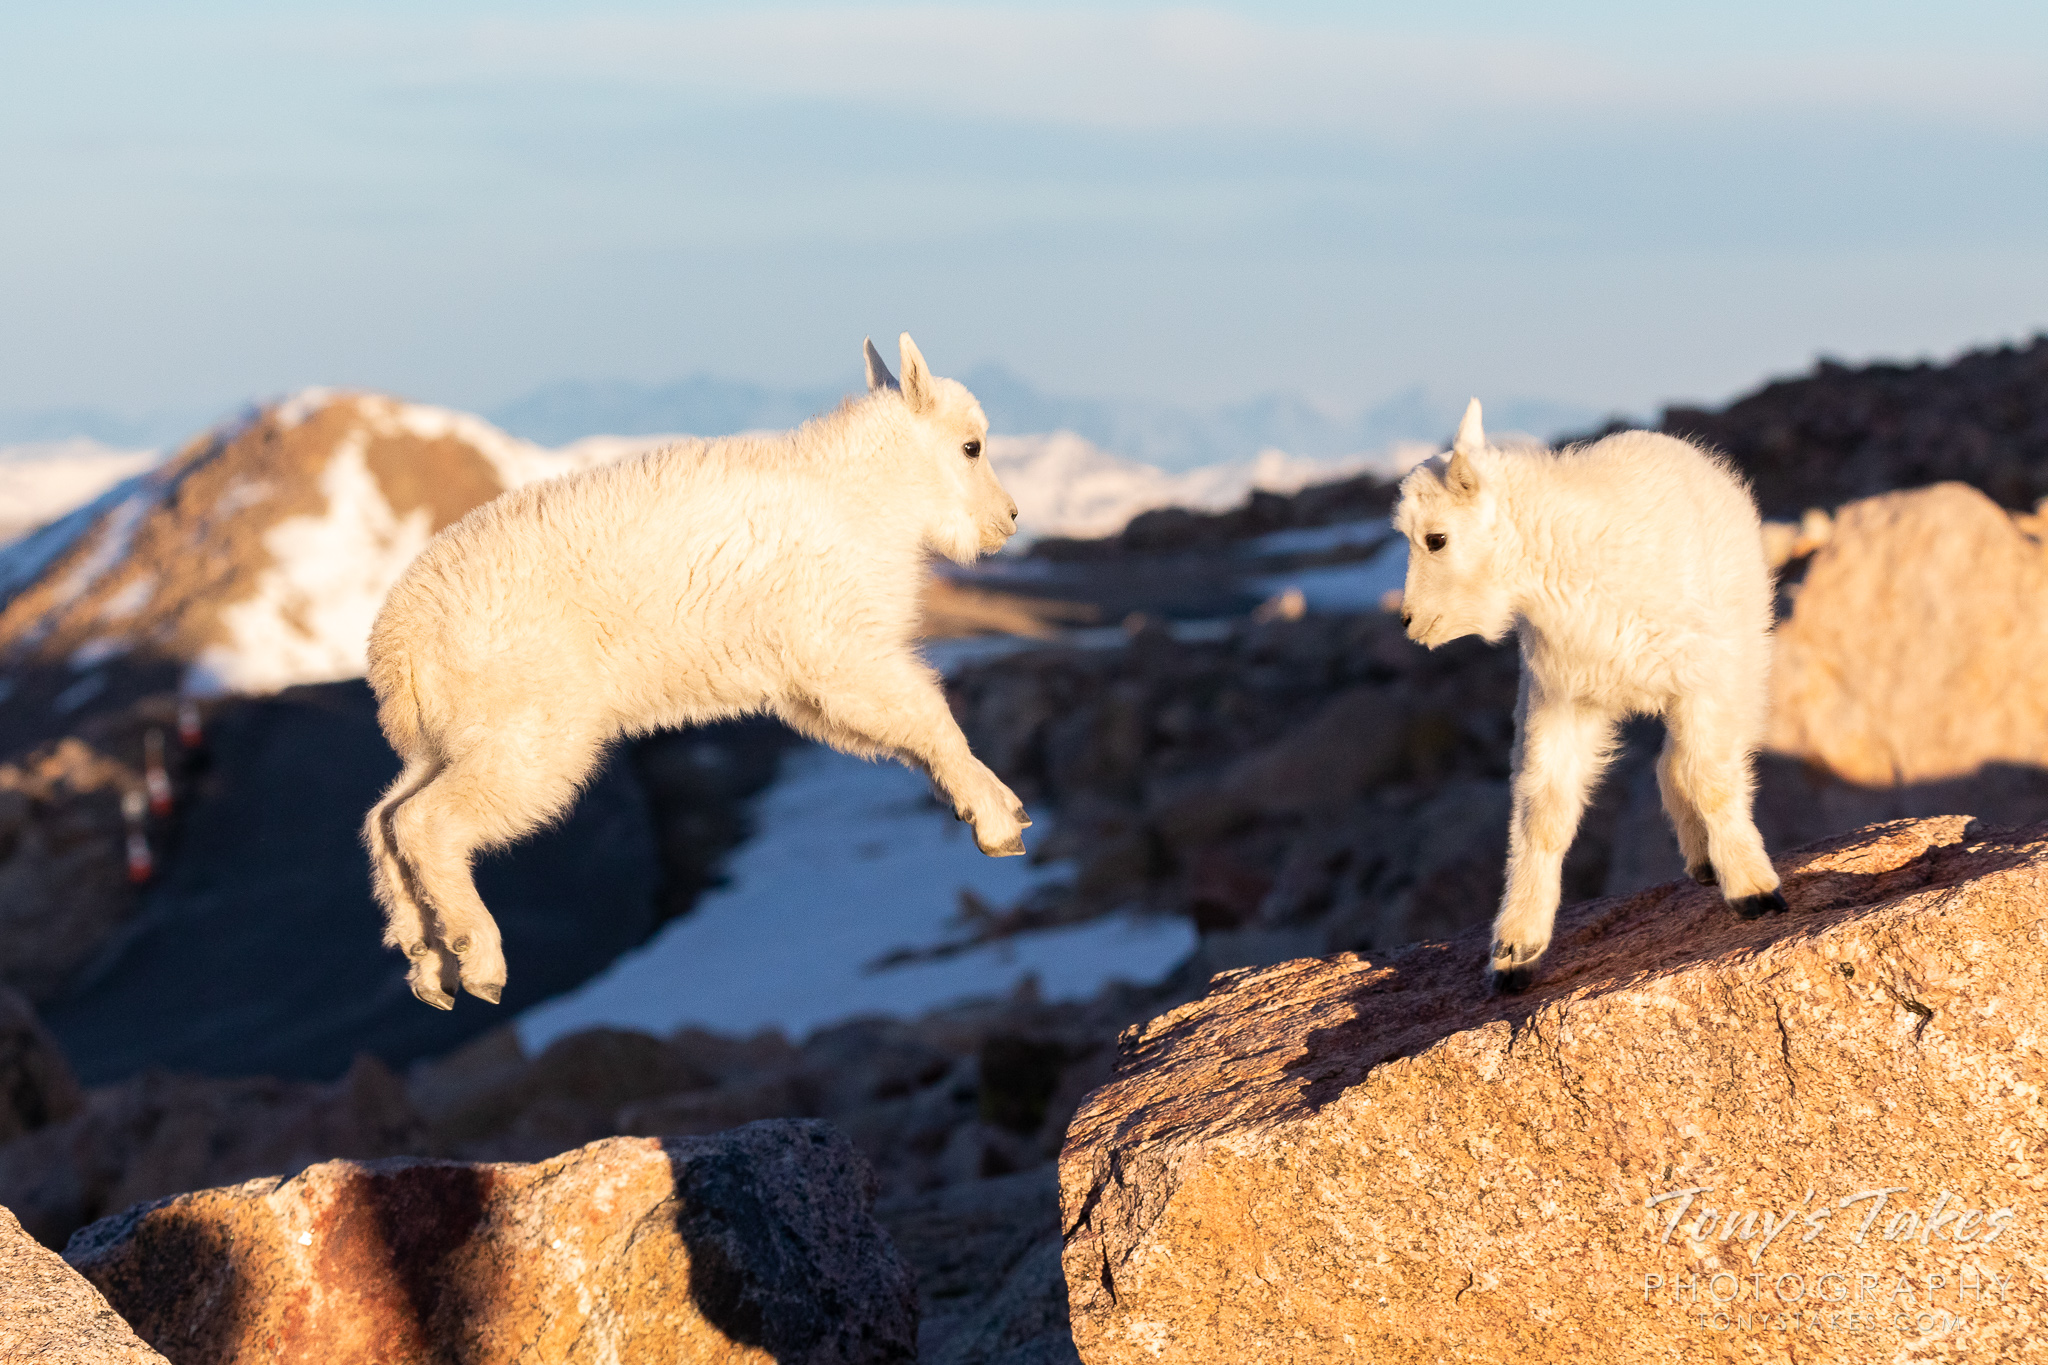 A mountain goat kid leaps from one boulder to another on Mount Evans. (© Tony’s Takes)